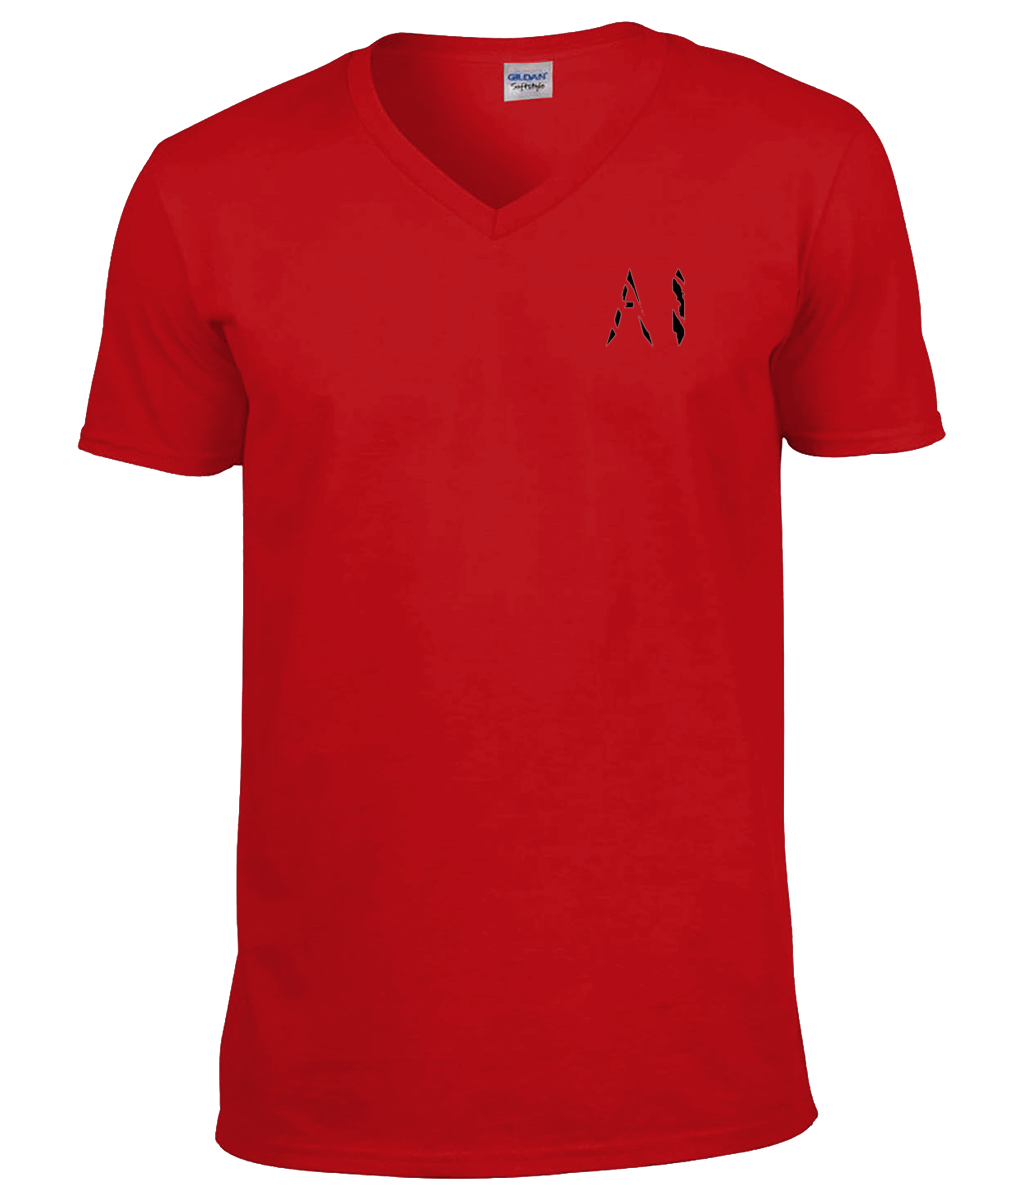 Womens Red Classic V Neck T-Shirt with black AI logo on left breast